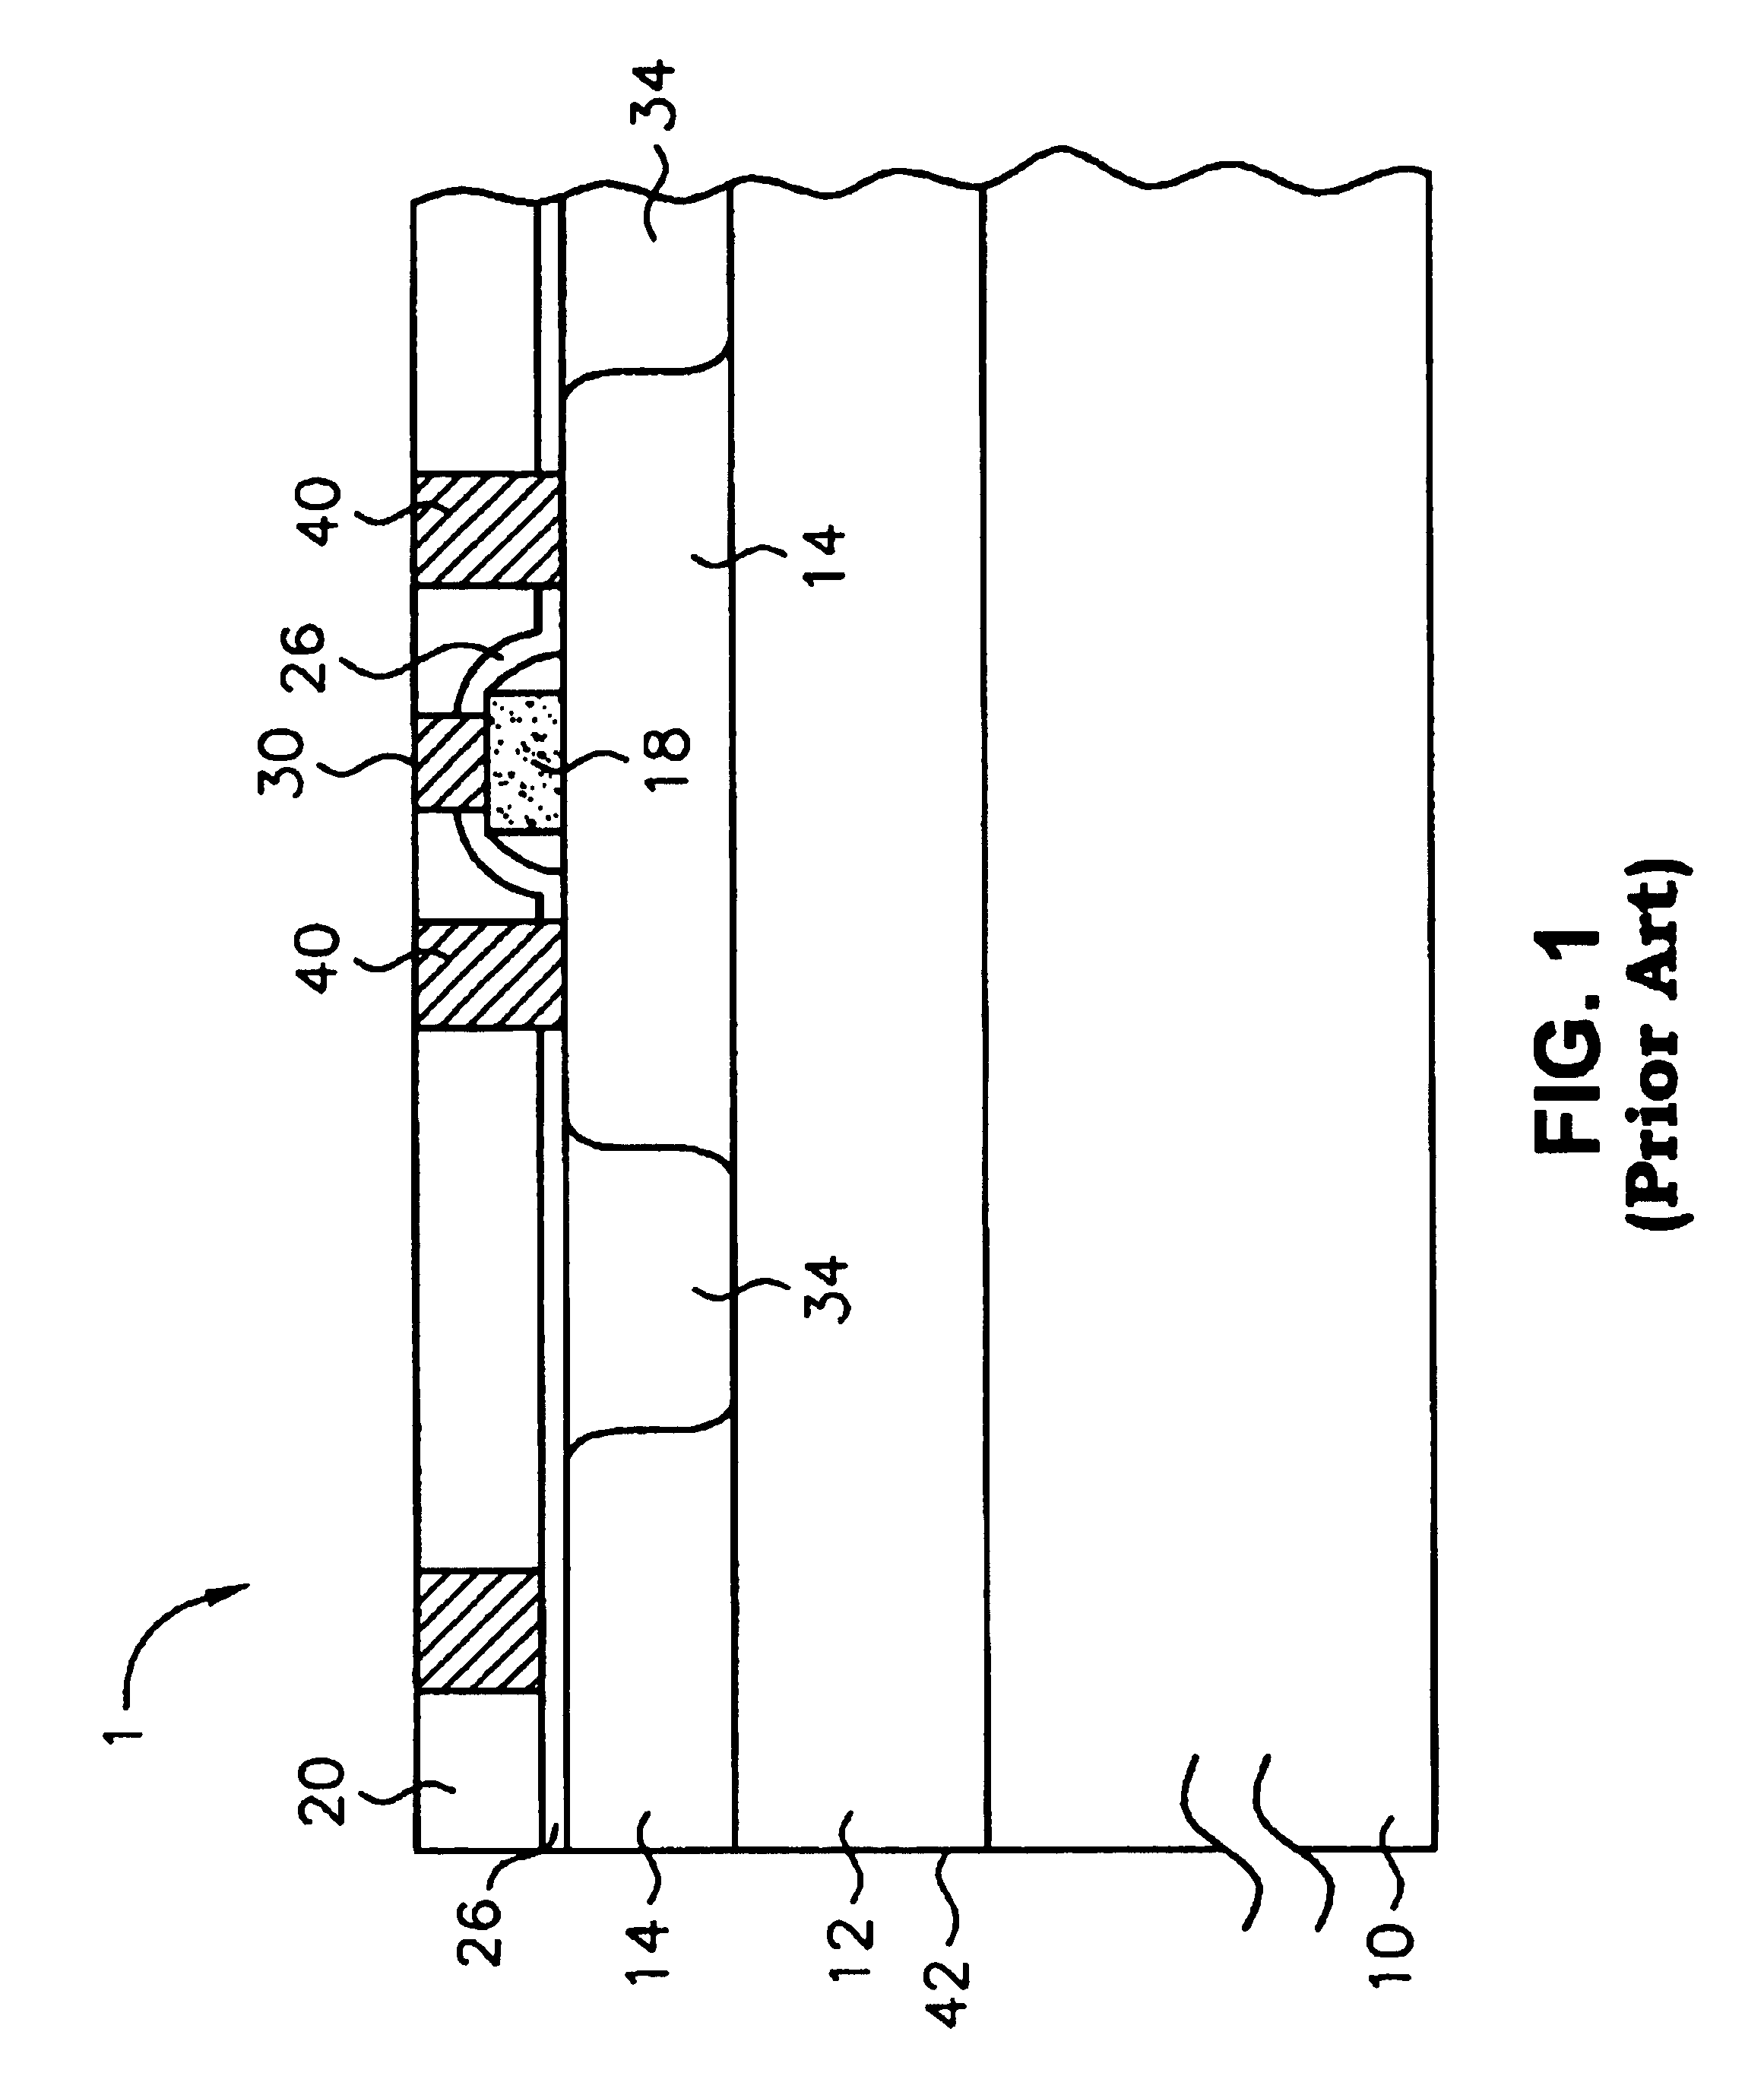 Silicon-on-insulator chip having an isolation barrier for reliability